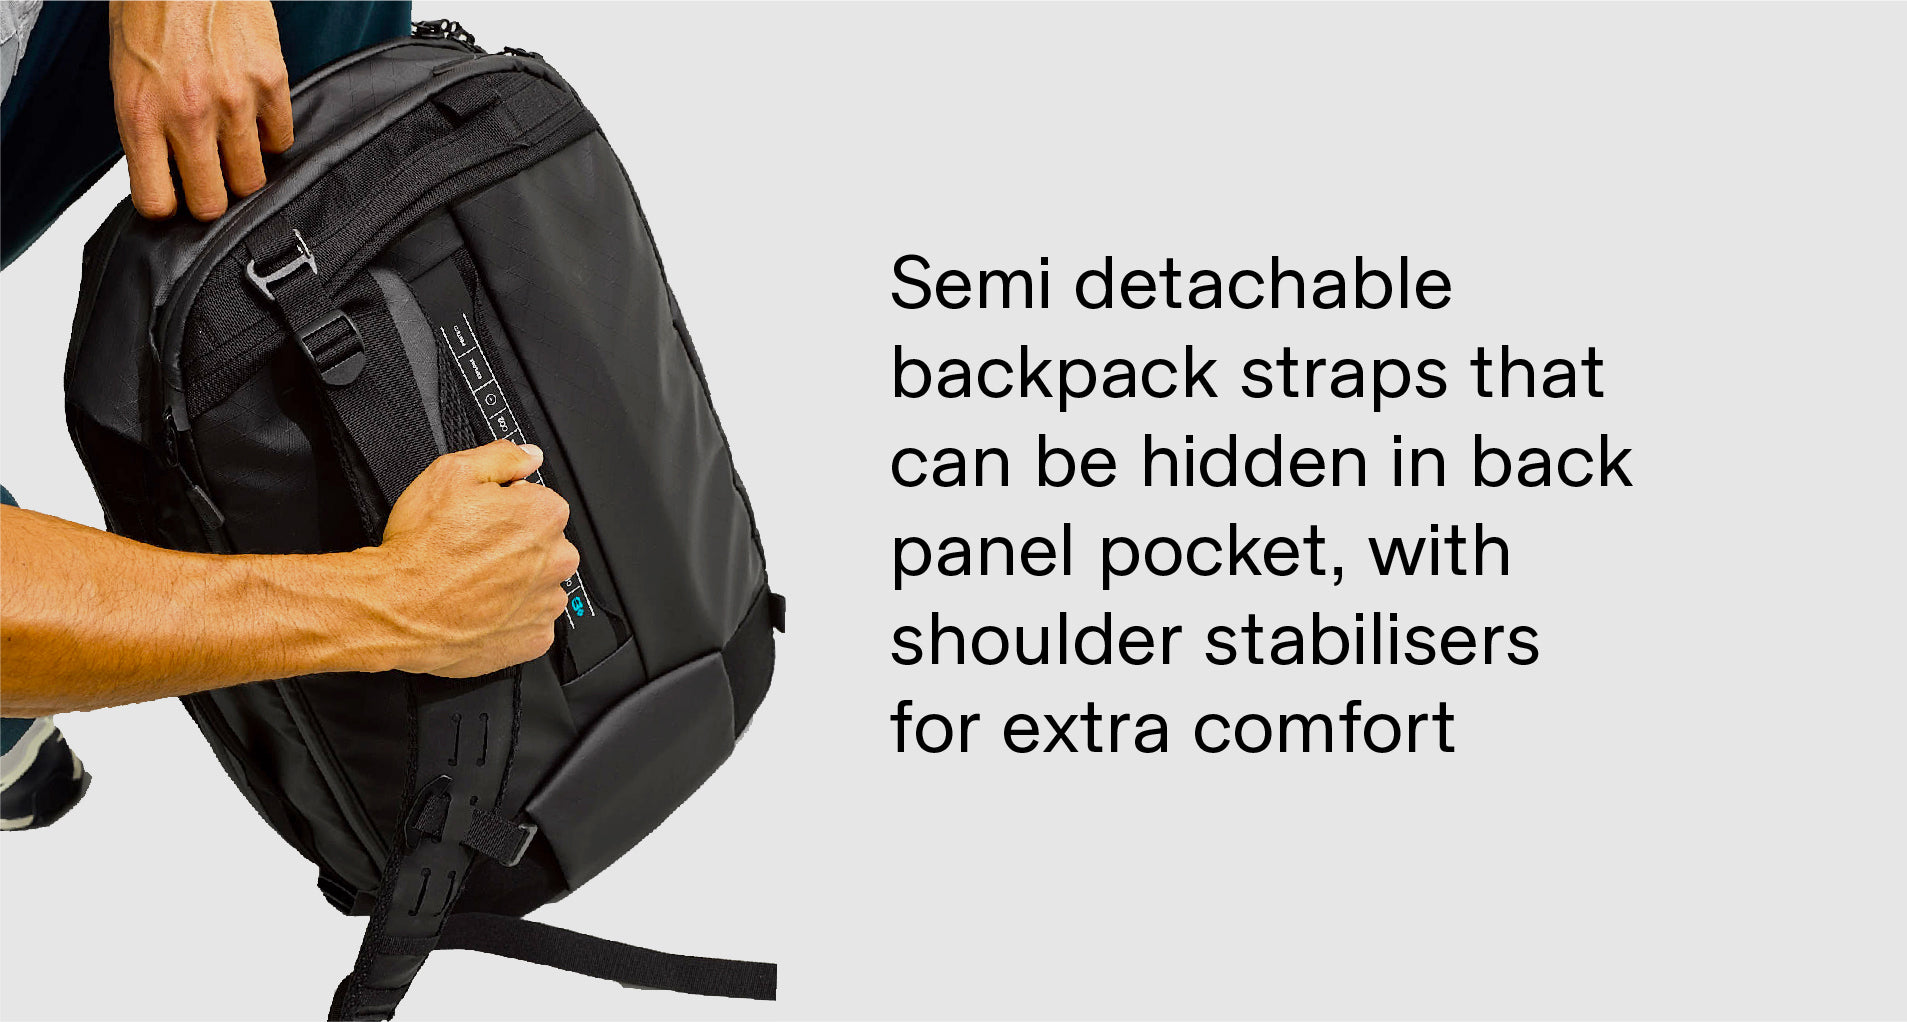 Th e23L Duffle Backpack with semi detachable backpack strap that can be hidden 